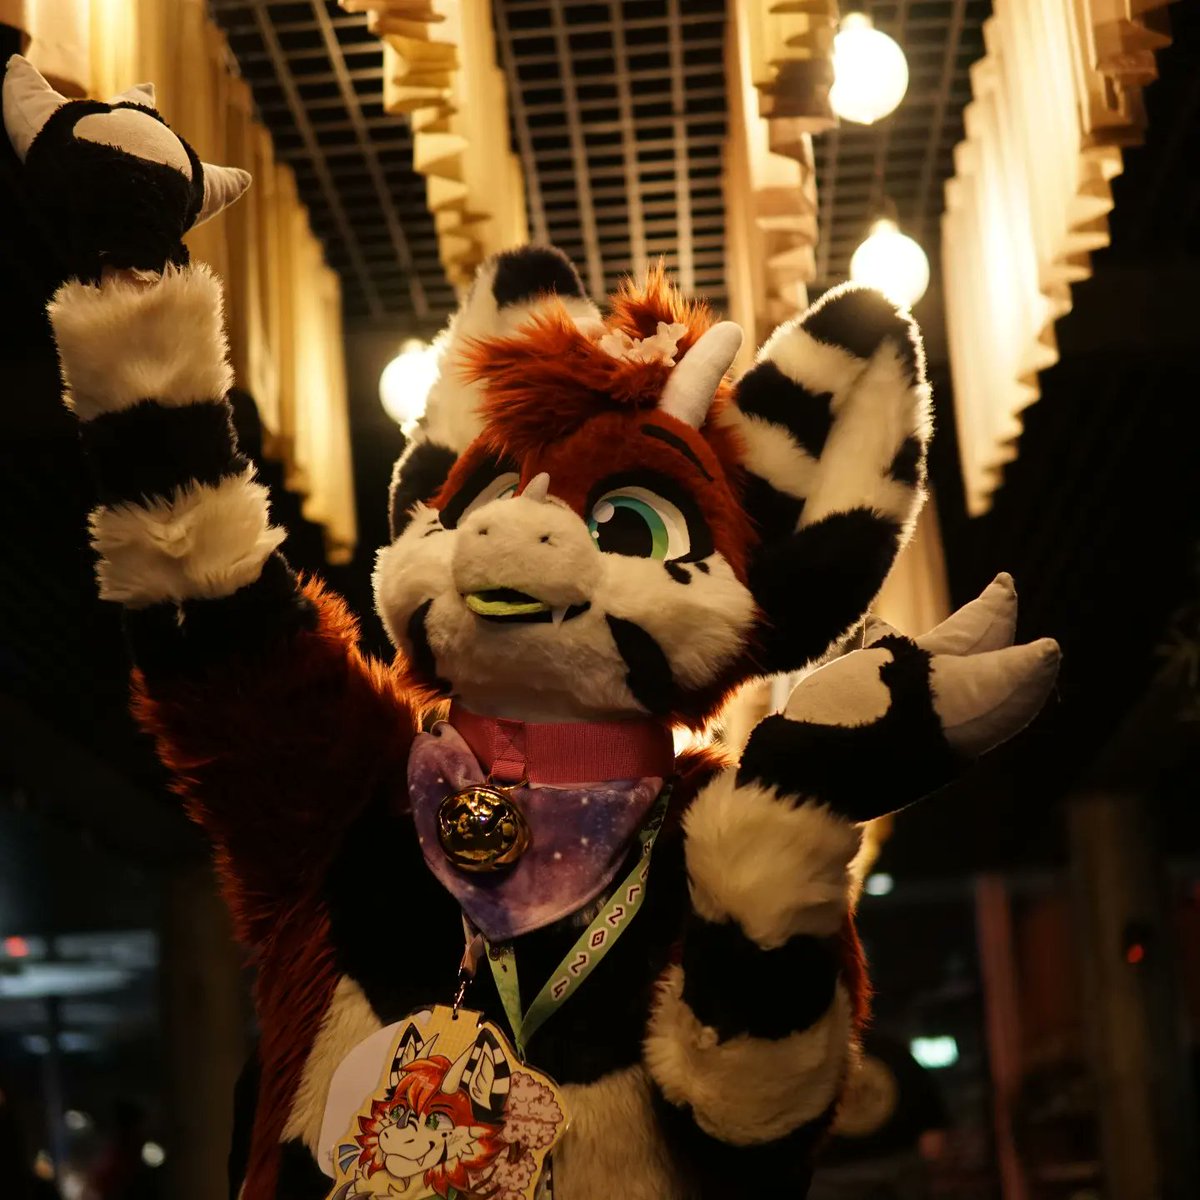 Here we go ^^
I visited @NordicFuzzCon last week for the first time :)
Had a great time. Also the first time traveling to Sweden and traveling with mochi :D
Hyped for the Japan theme next year !

@nfc #nordicfuzzcon #kemono #furry #FursuitFriday #fursuit #cosplay #lights #dragon